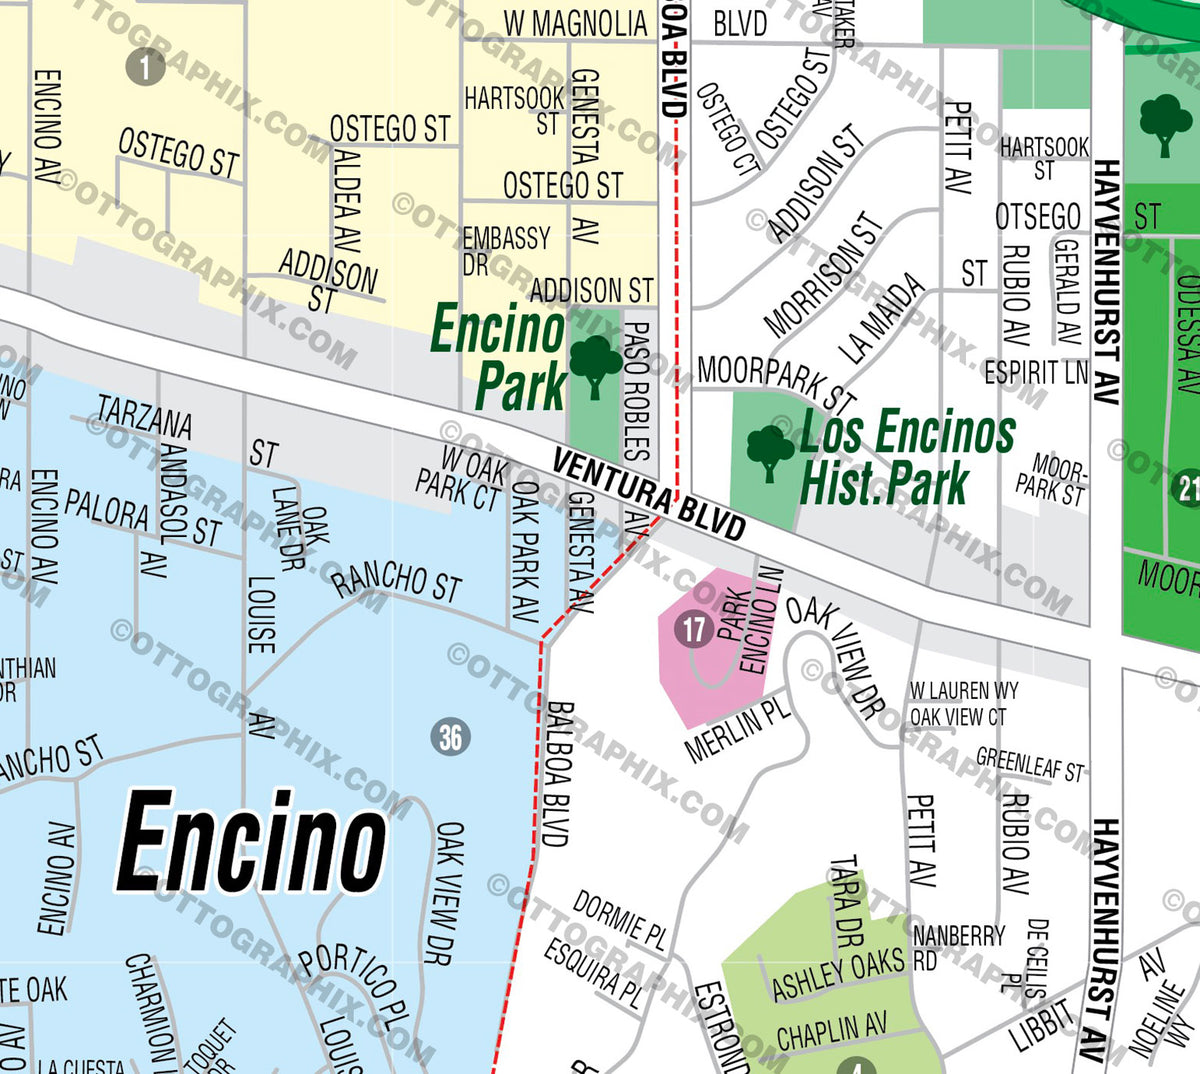 All 97+ Images is encino in the city of los angeles Excellent